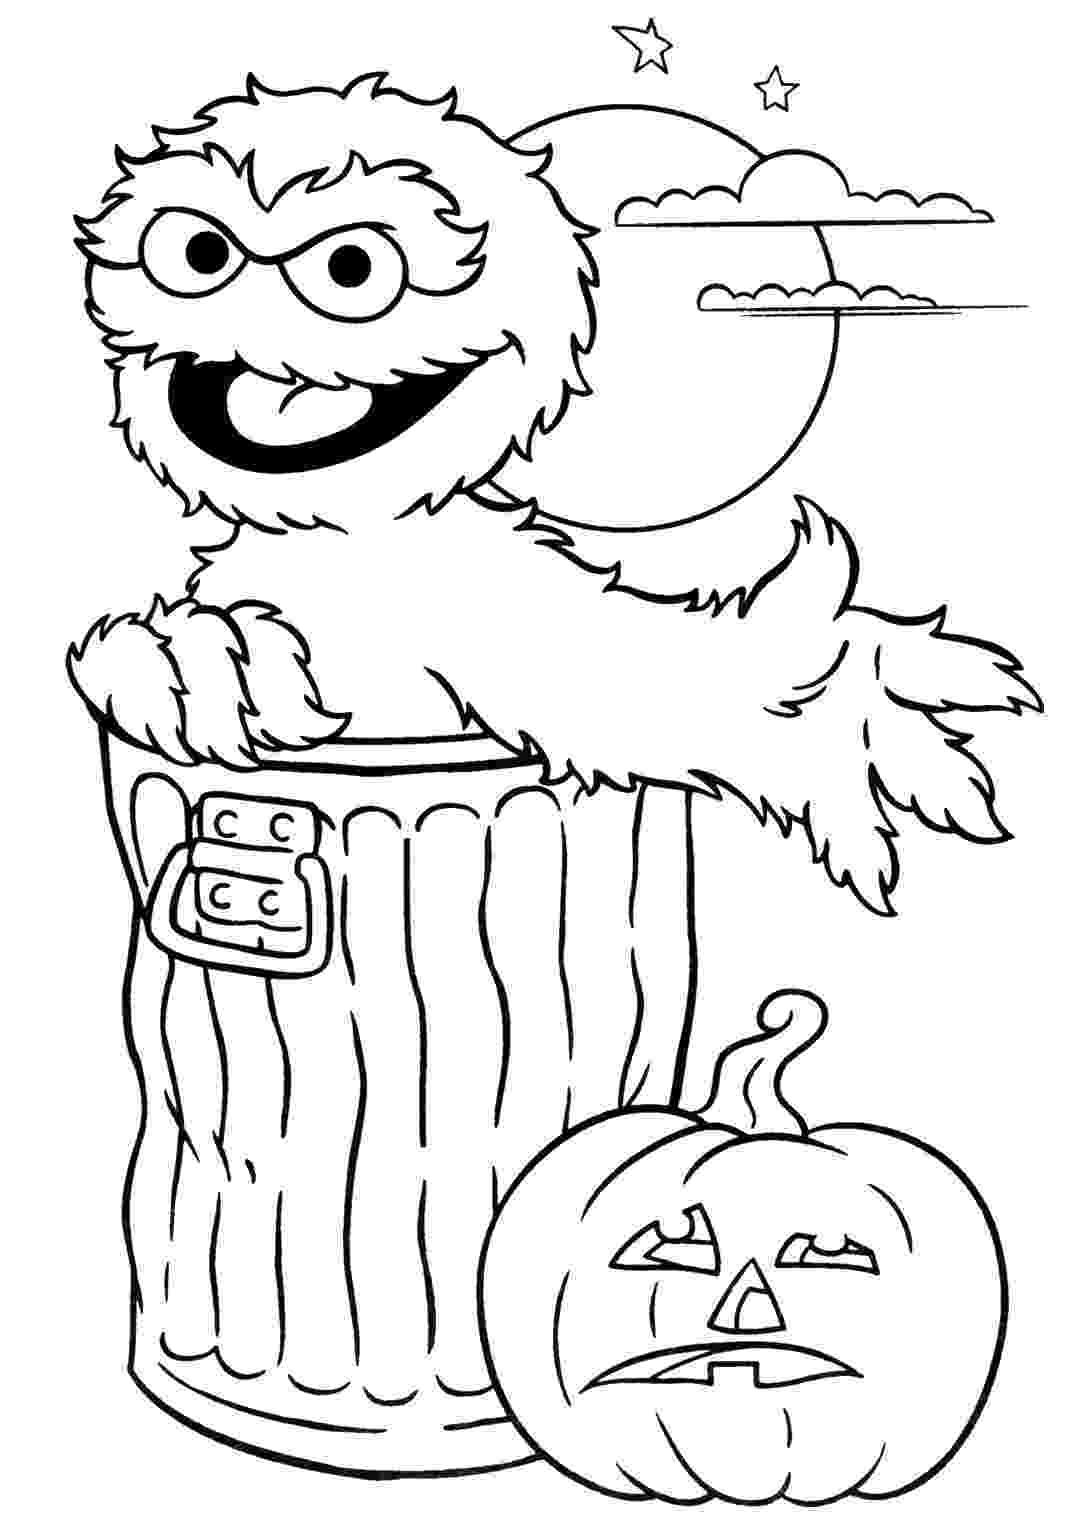 halloween coloring pages to color online hello kitty halloween coloring pages minister coloring color coloring online to pages halloween 